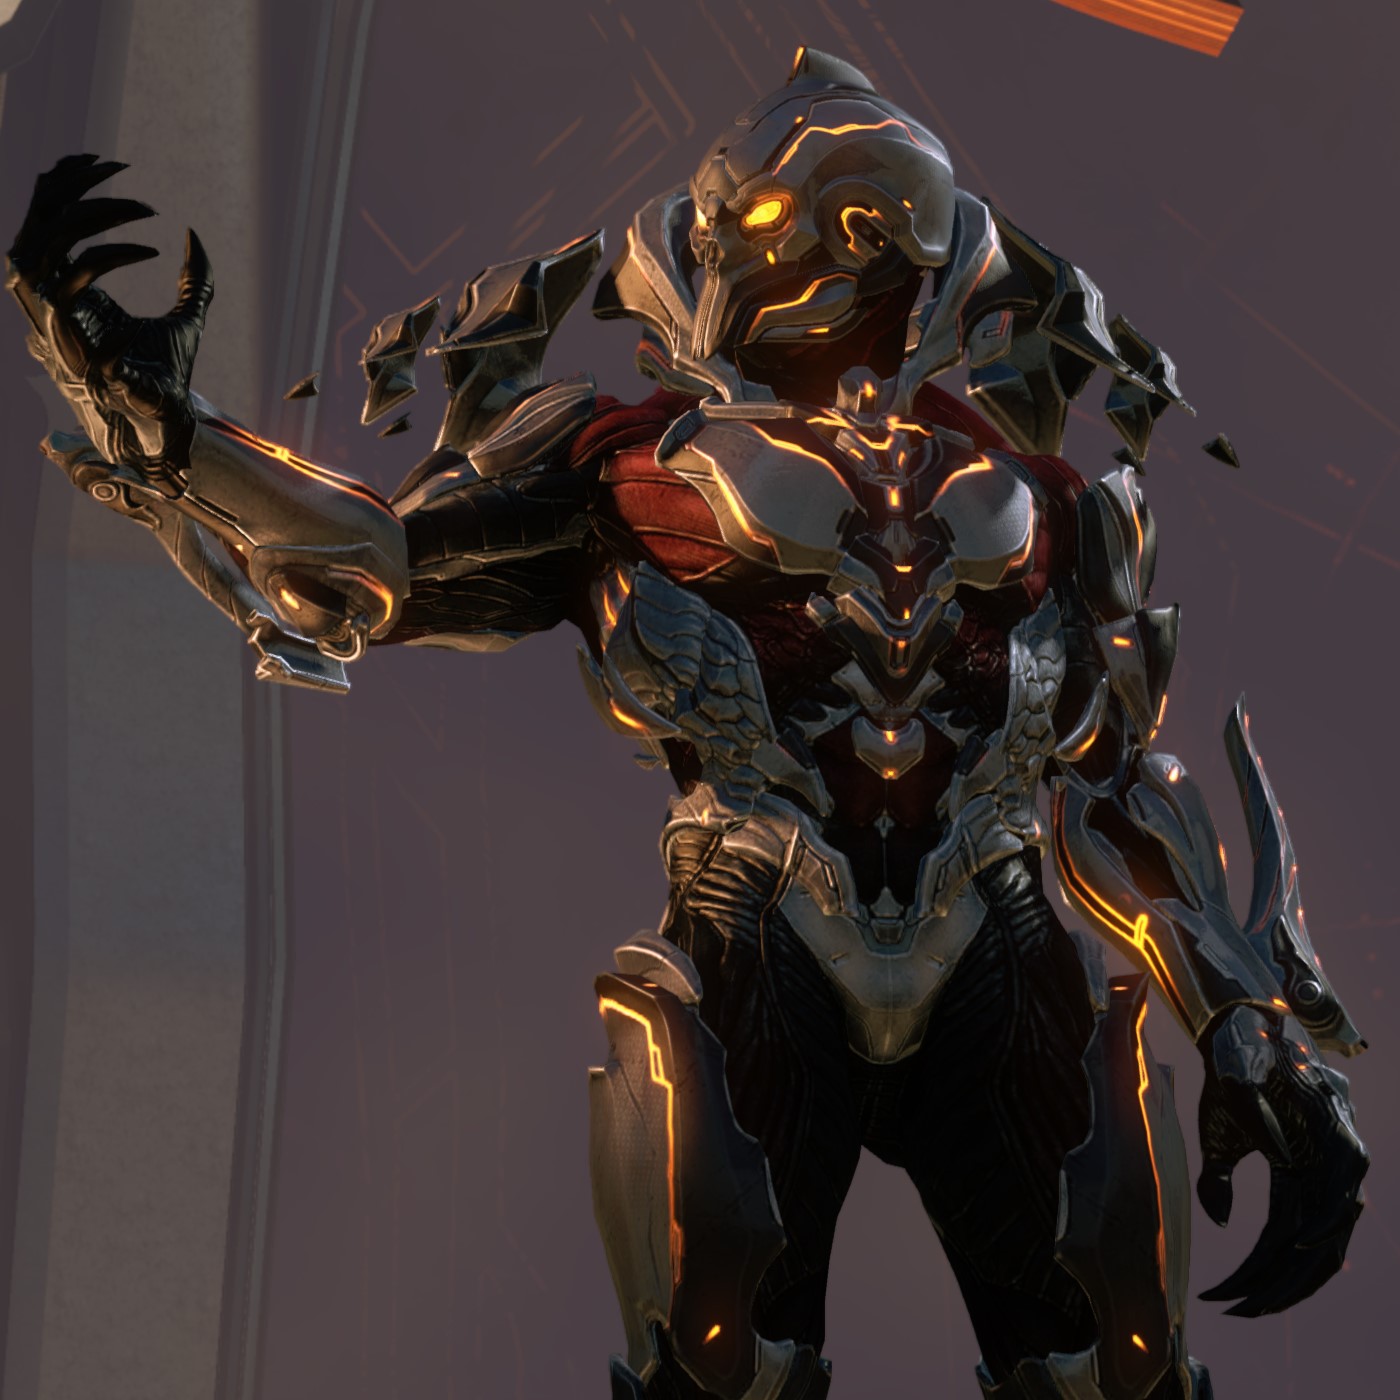 http://www.halopedia.org/images/4/49/H4-Didact-ArmorFront-Detail.jpg